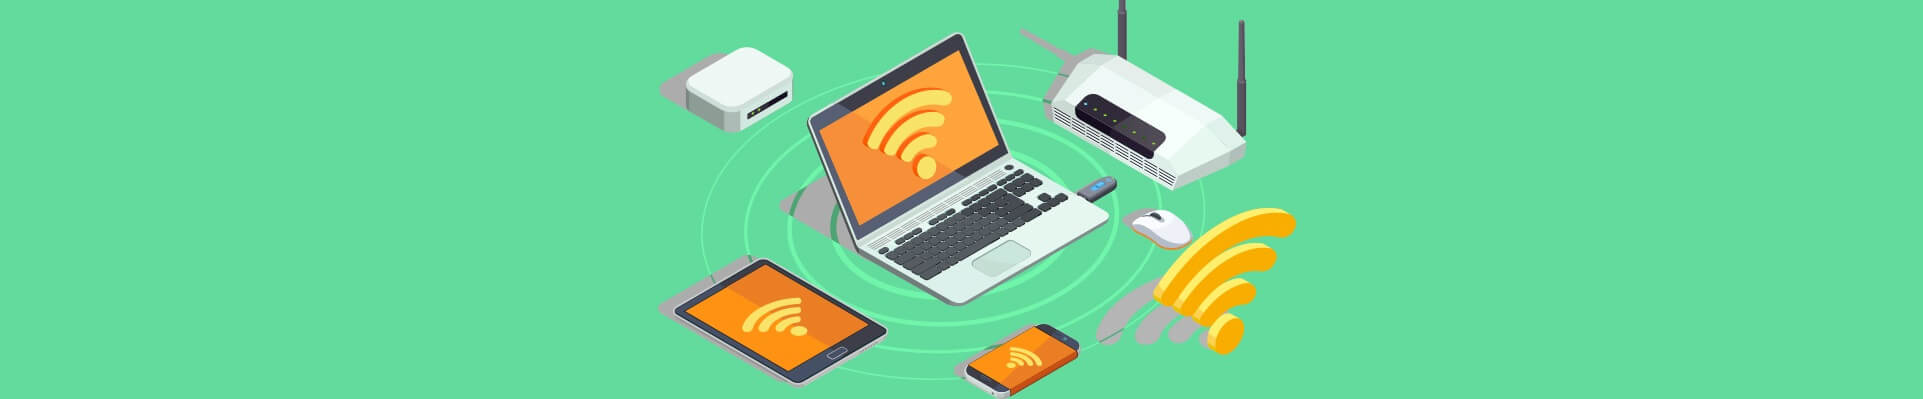 5 SOLUTIONS TO AVOID SLOW WI-FI SPEEDS